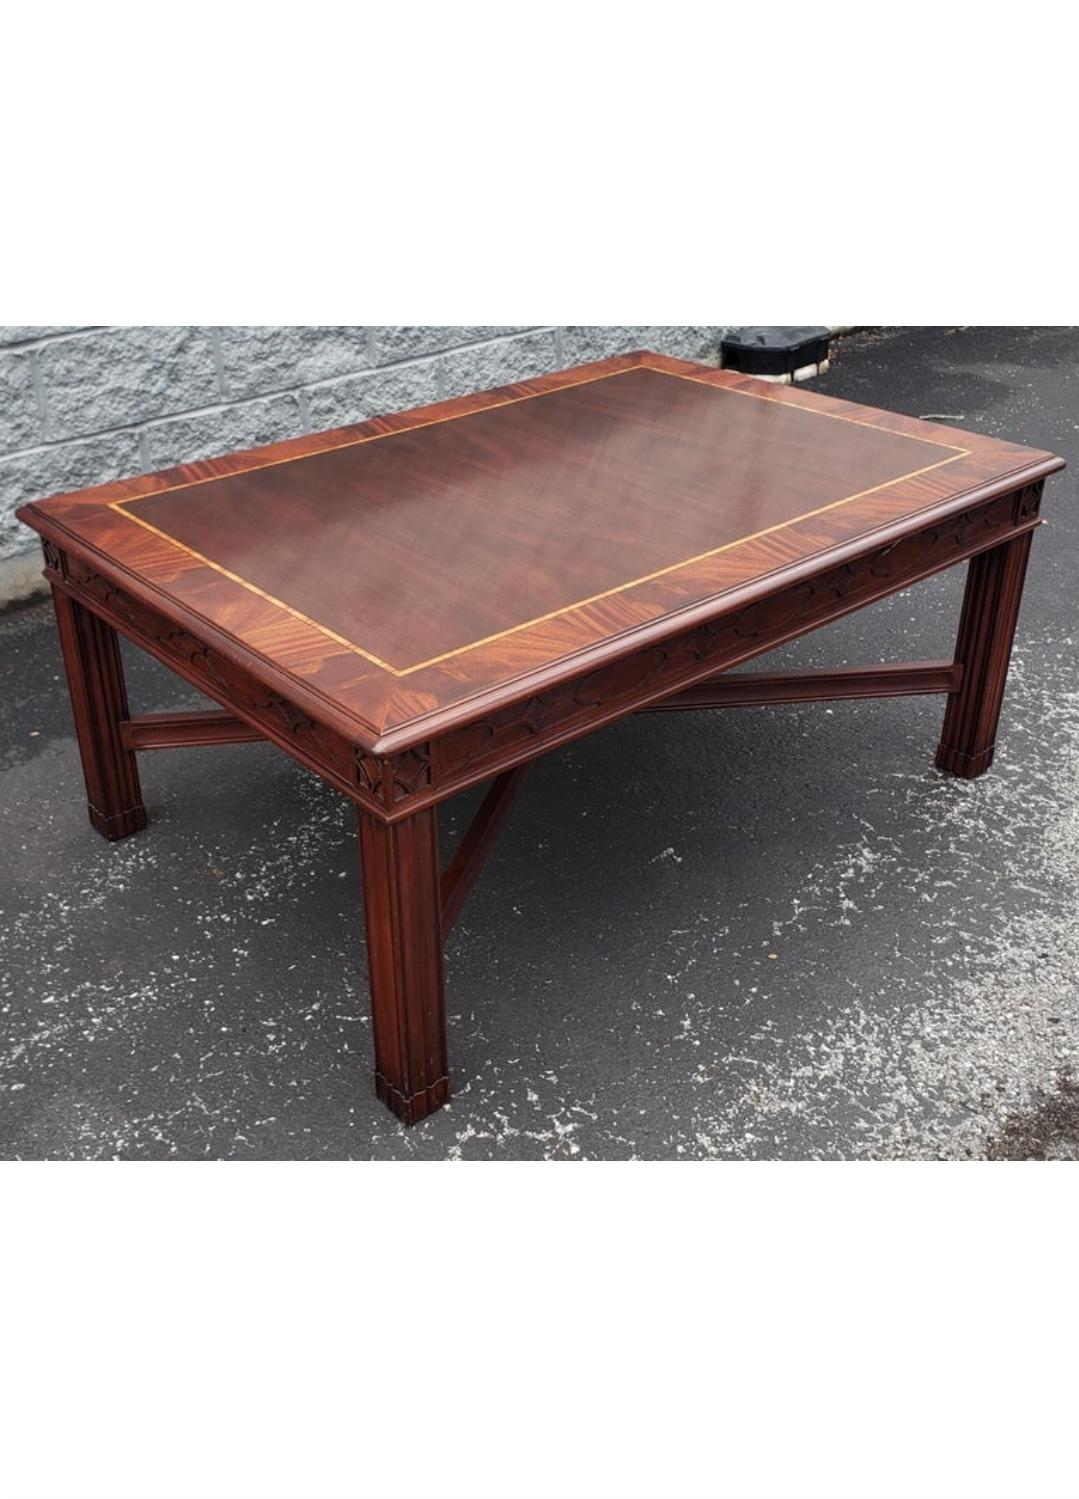 Contemporary Henkel Harris Chippendale Mahogany and Tulipwood Inlay Coffee Table w/ Fretwork For Sale